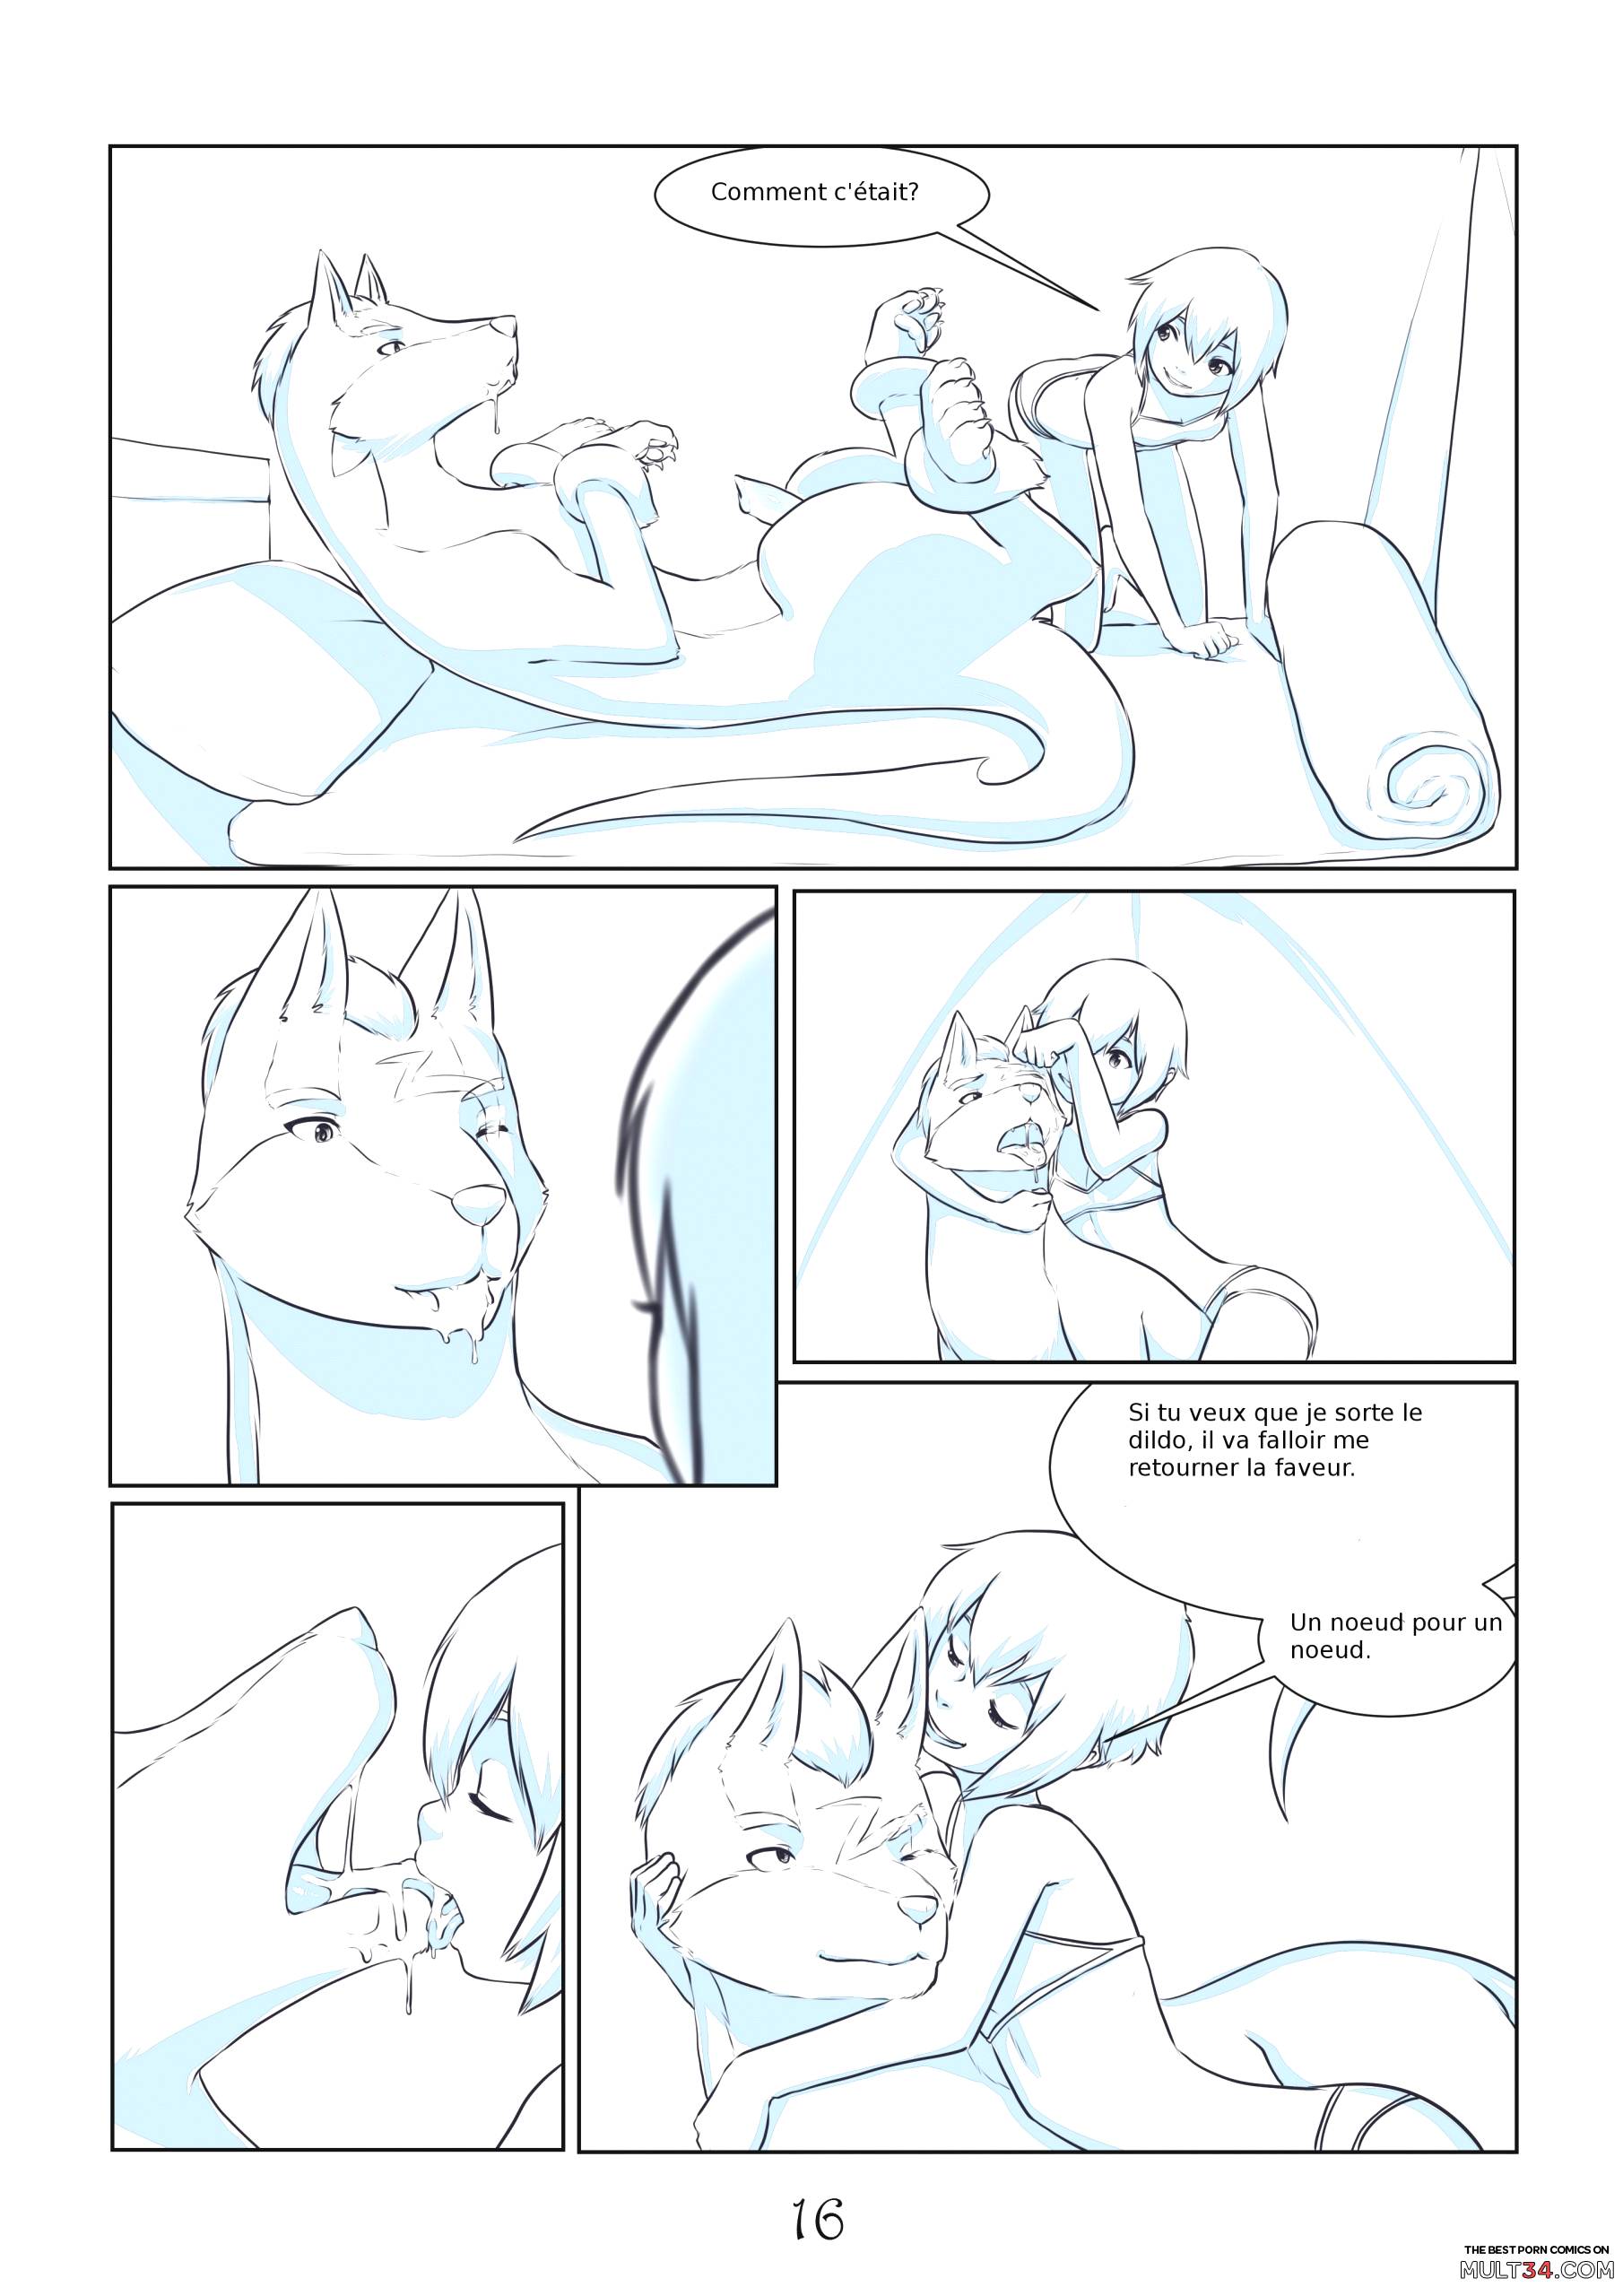 Tales of Rita and Repede - Episode 2 page 16